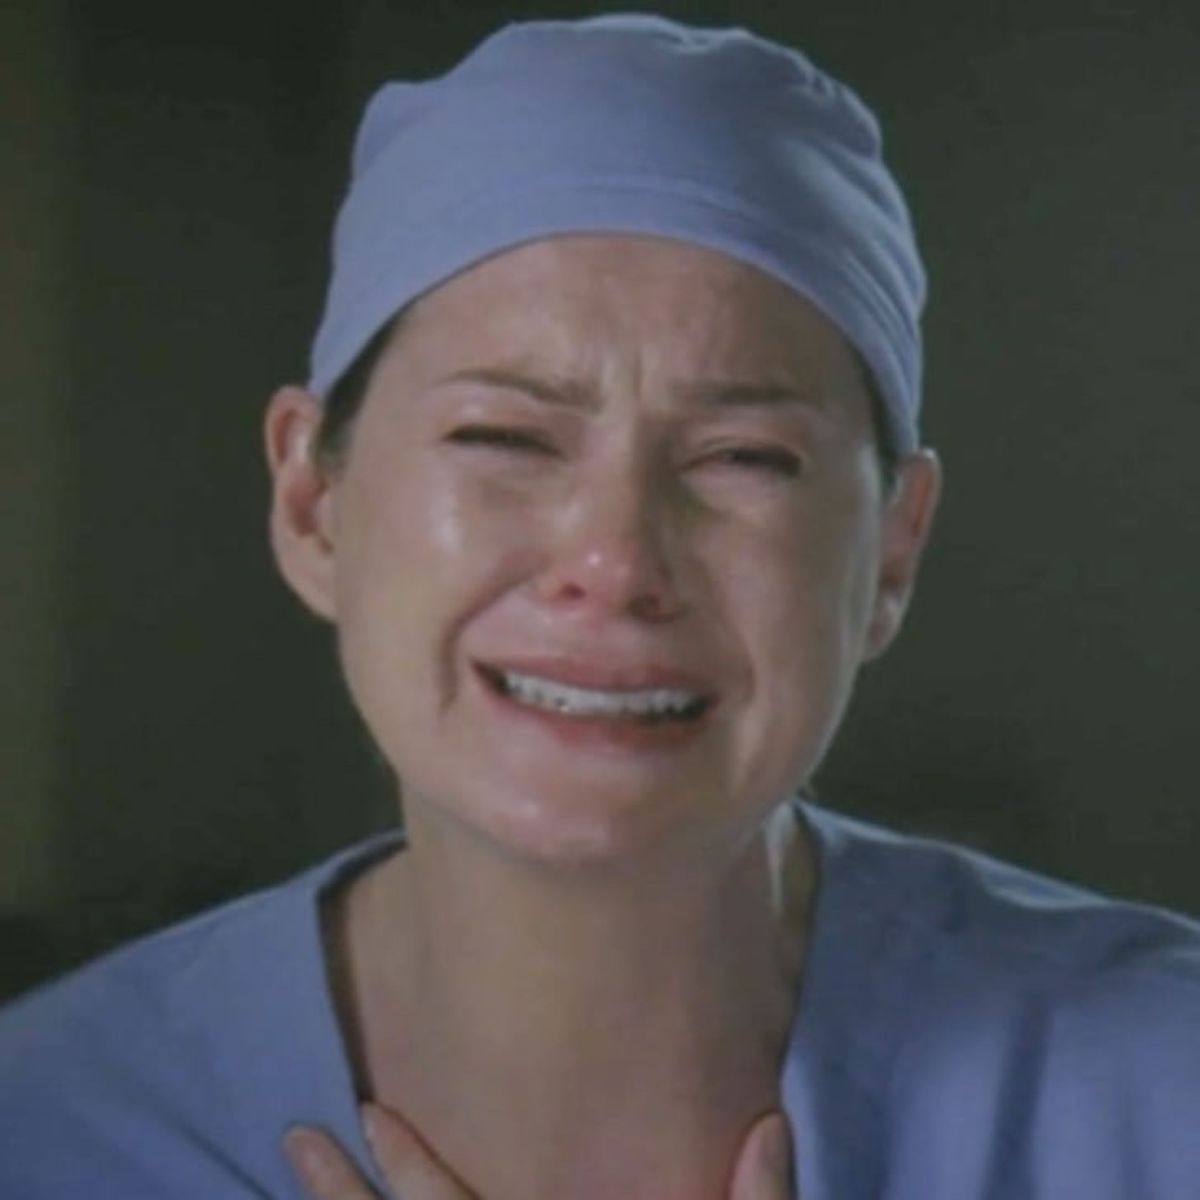 The Emotional Stages Of Finals Week As Told By Grey's Anatomy